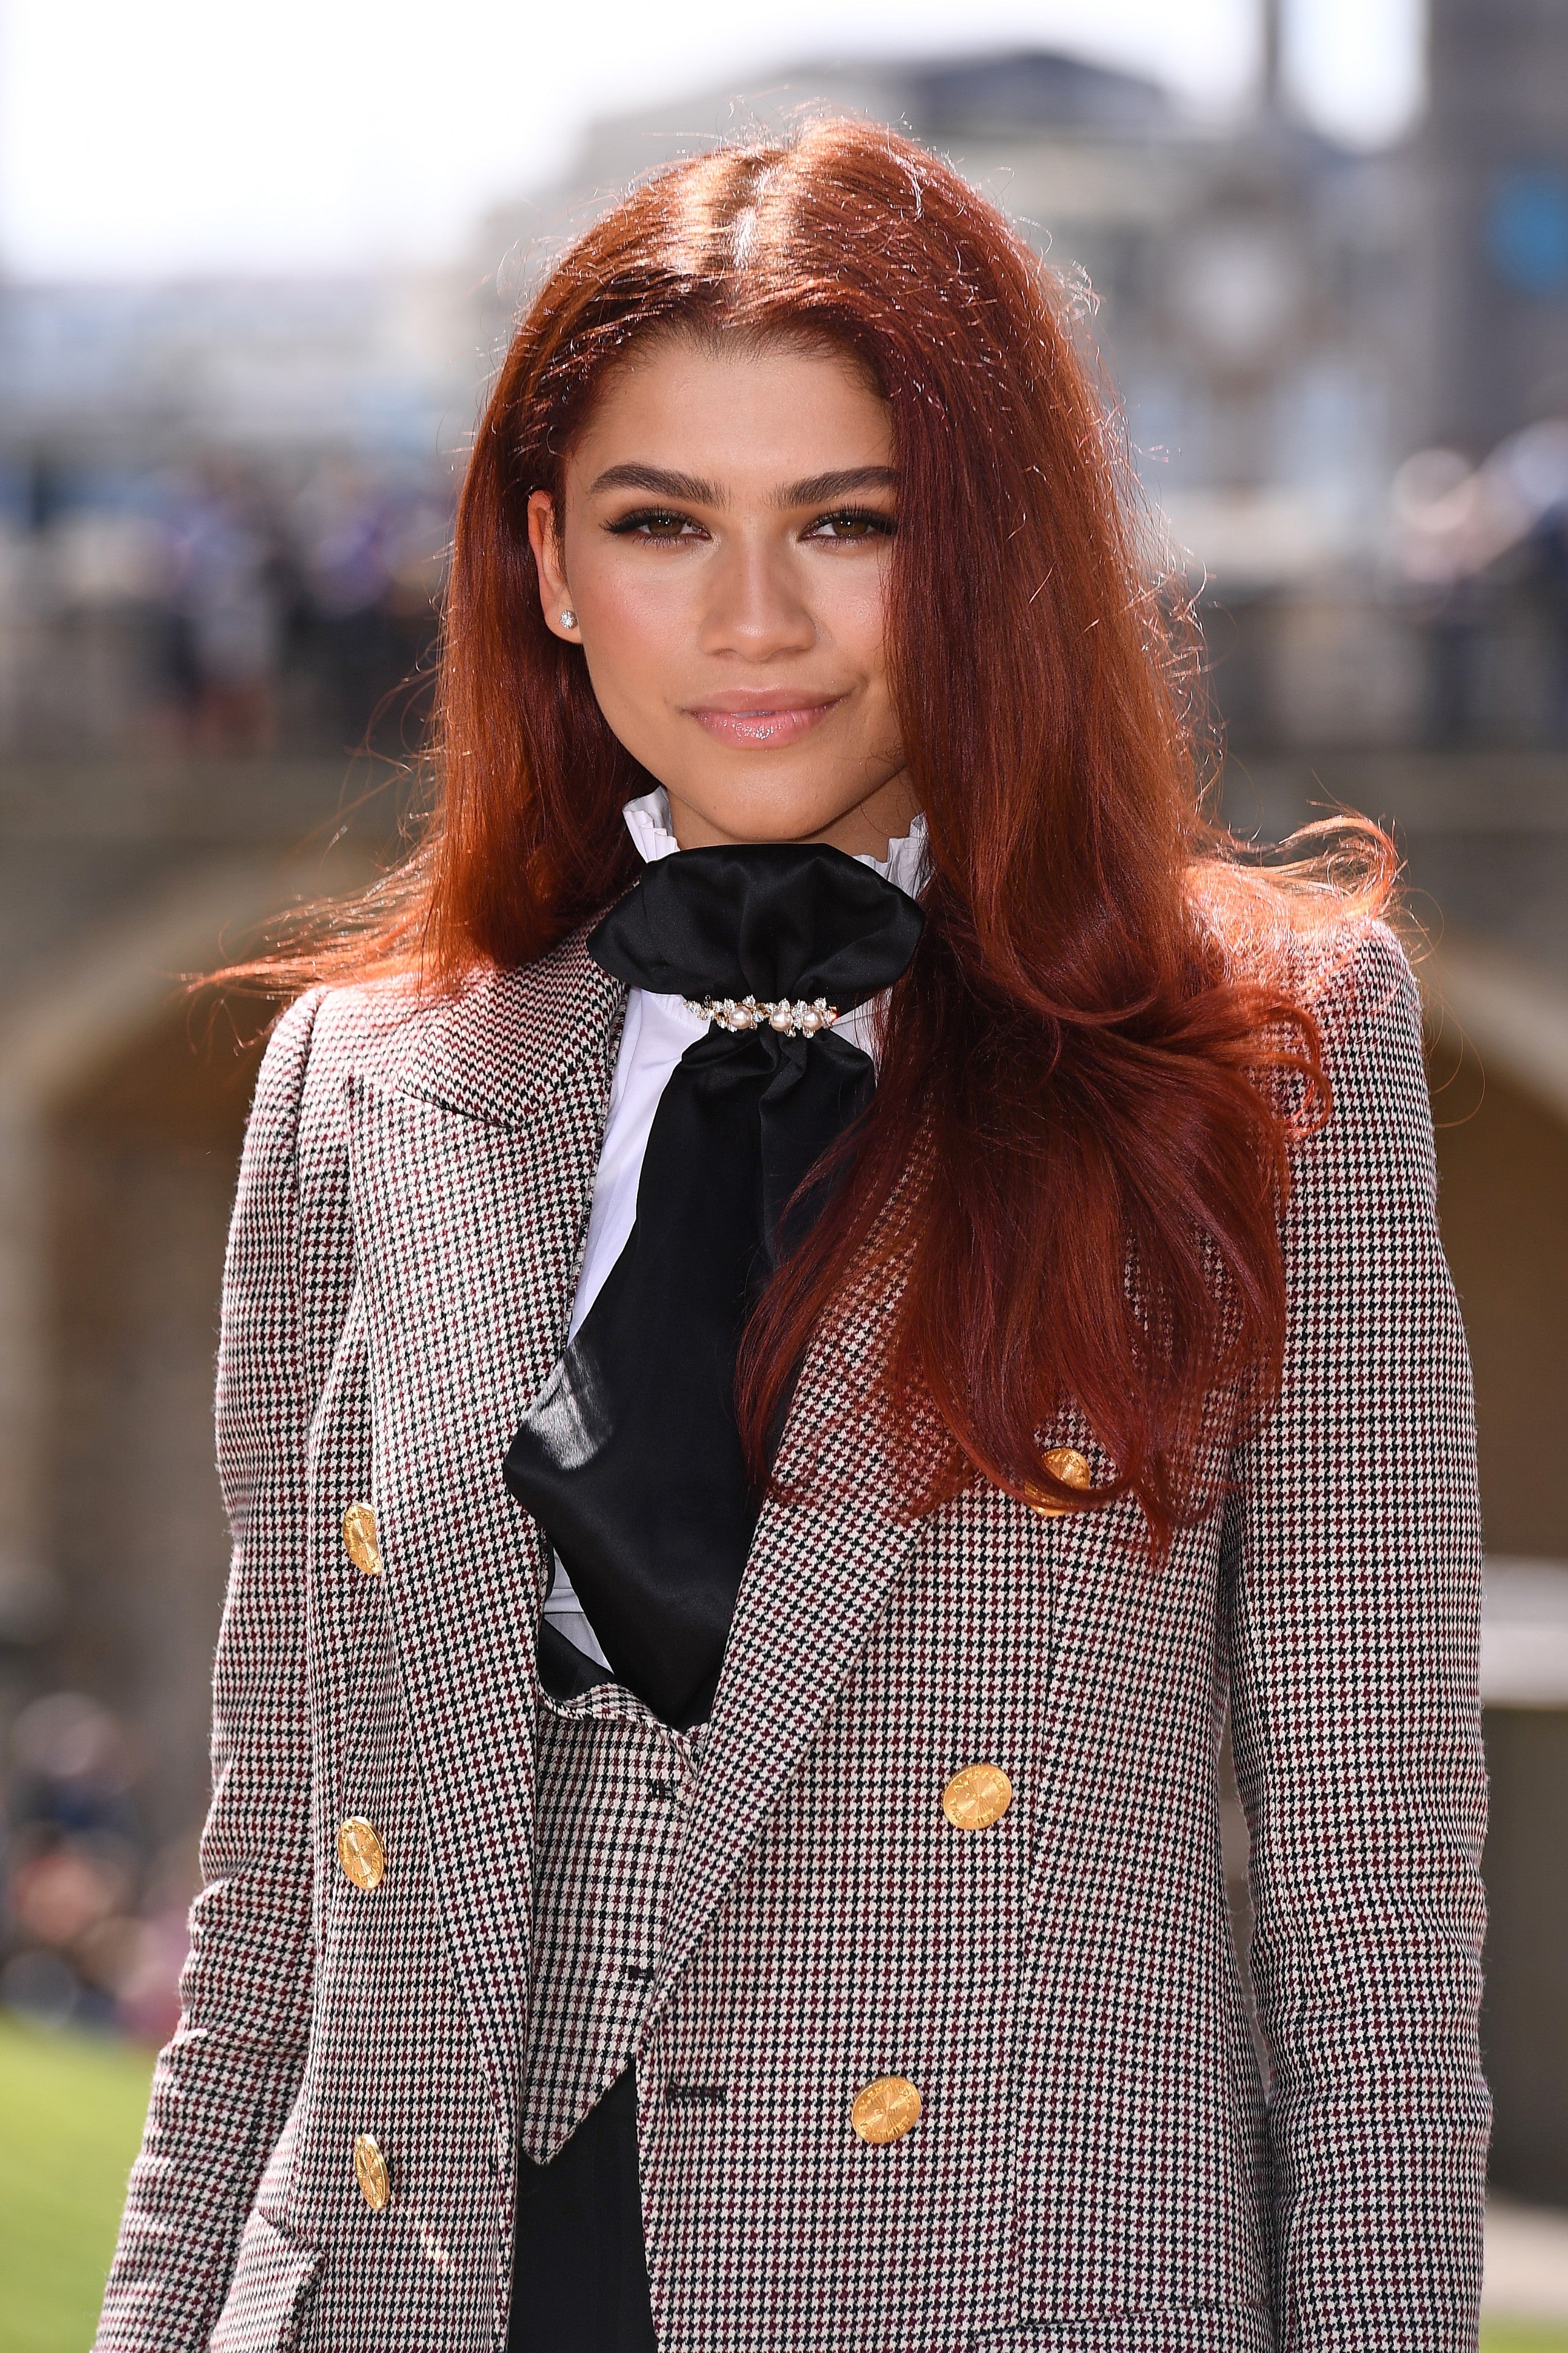 You Have To See Zendaya’s Fiery New Look